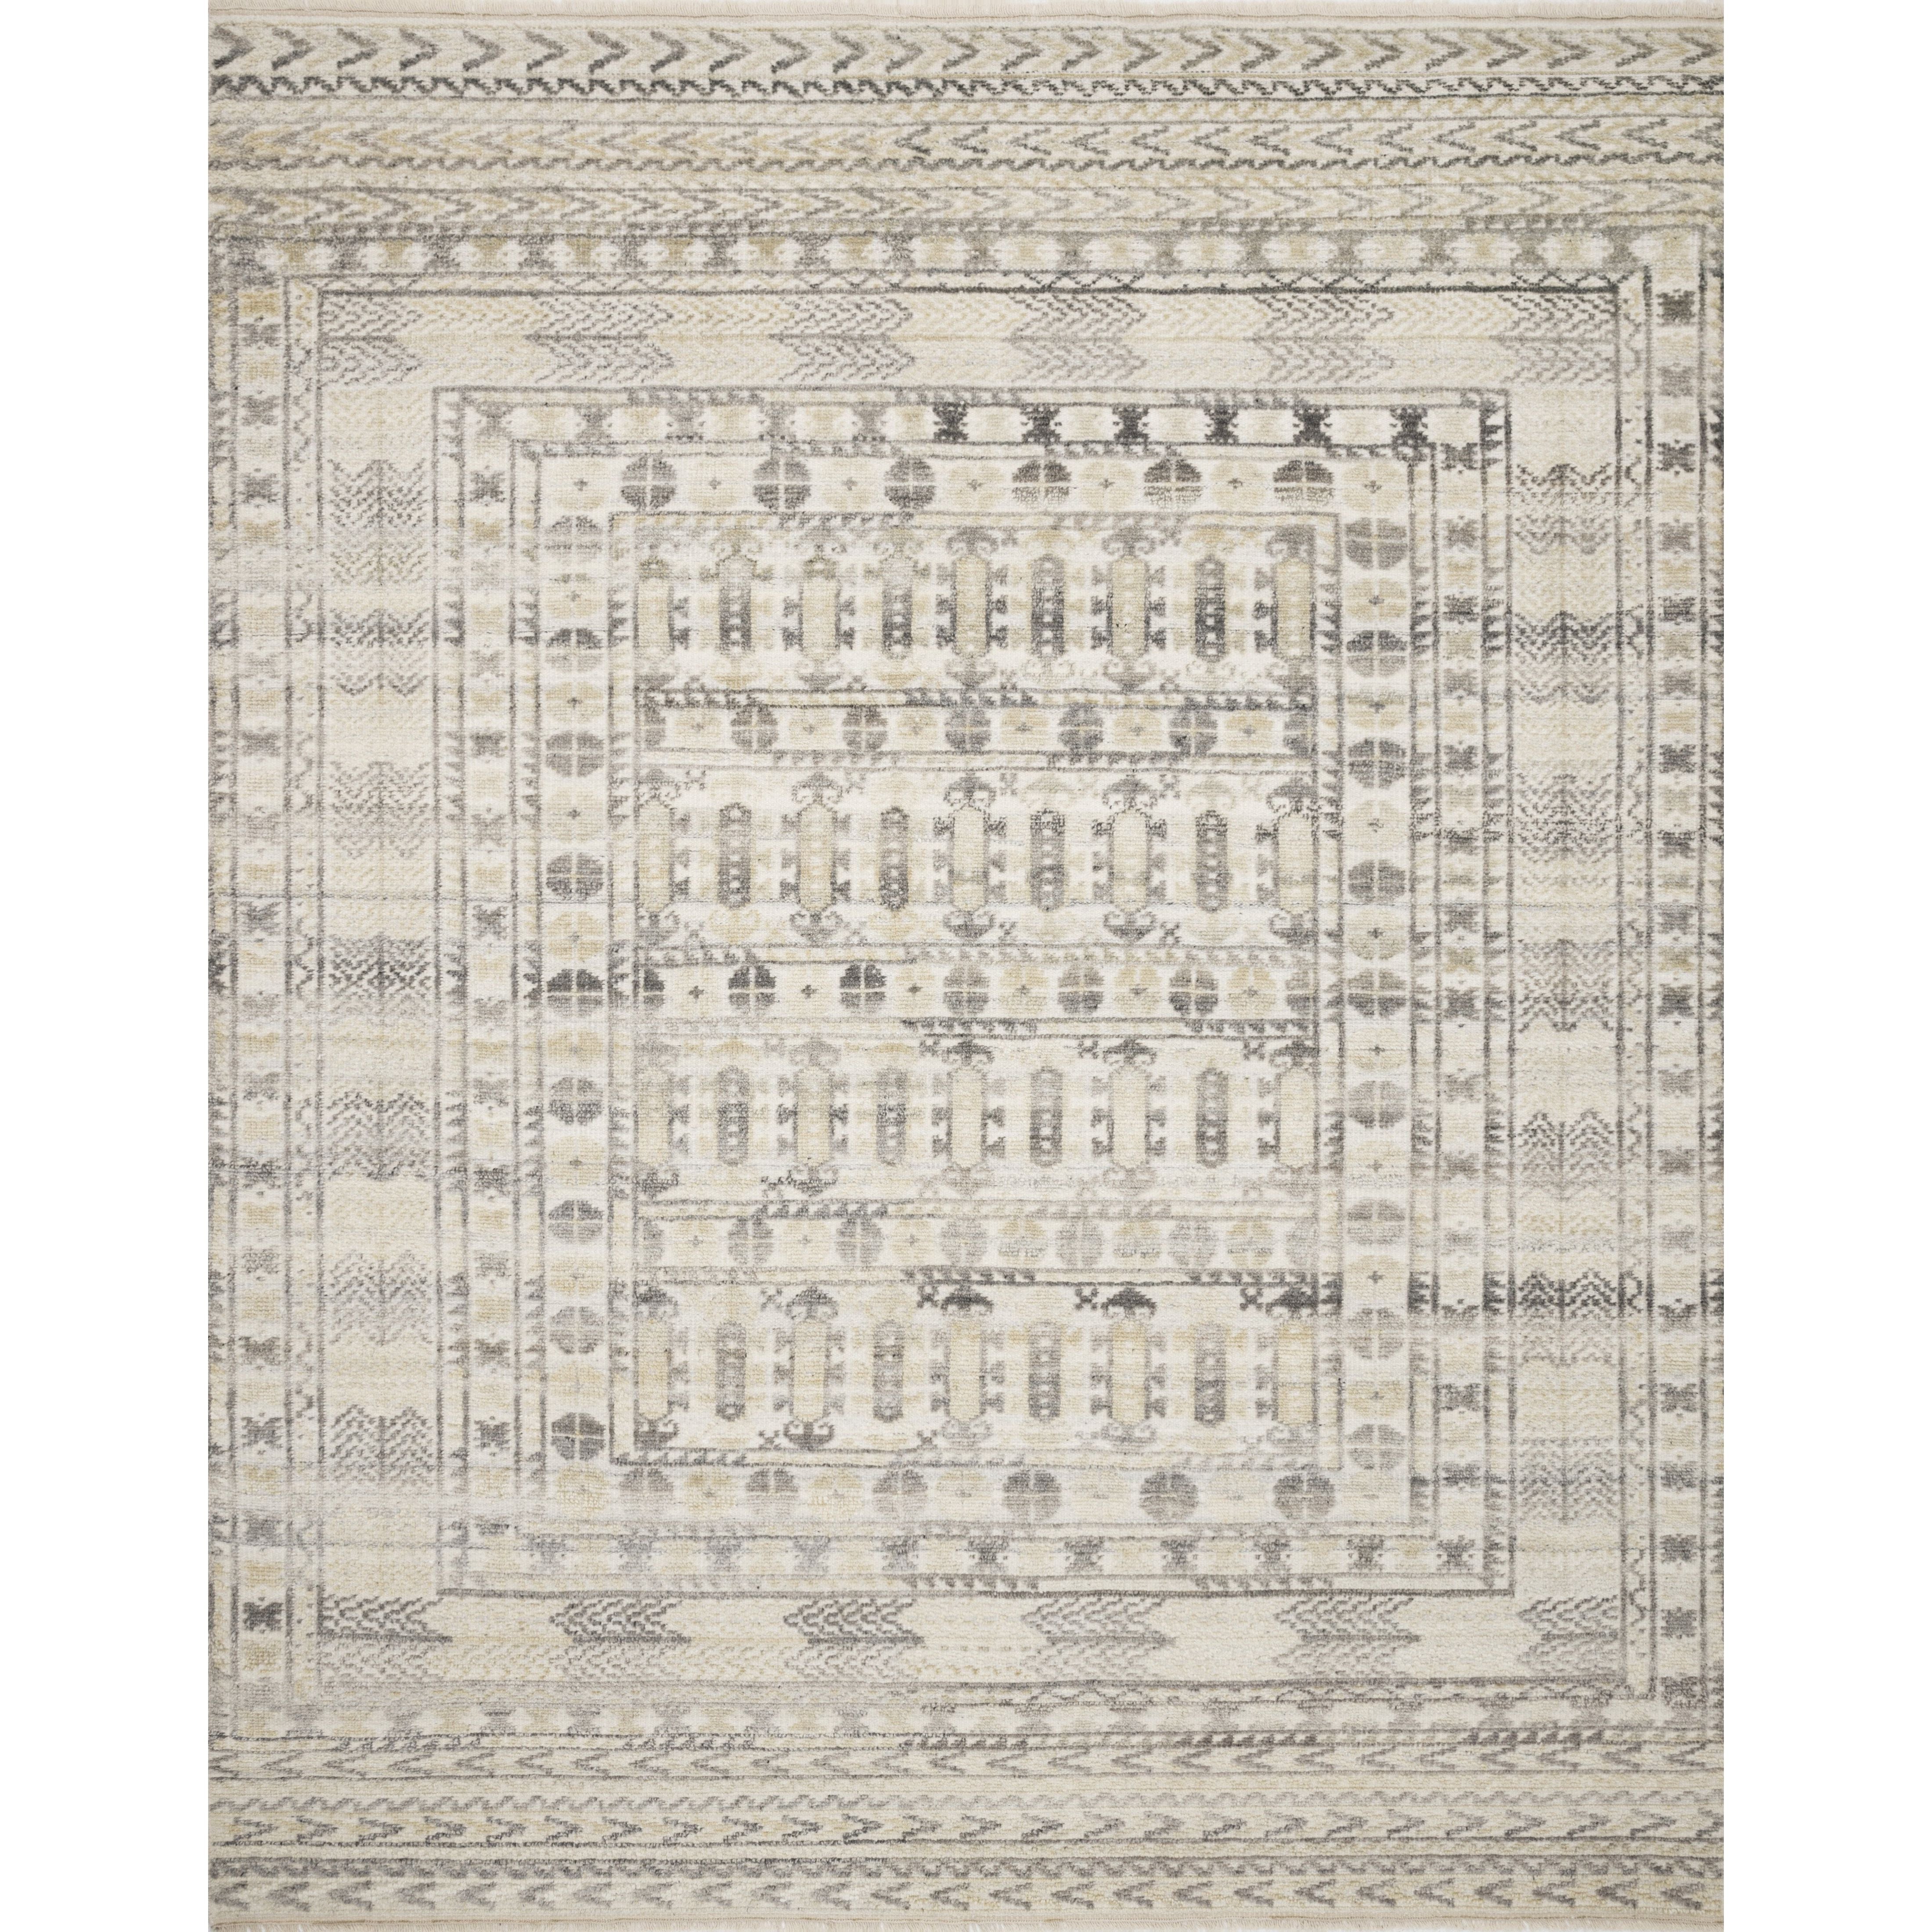 Both timeless and modern, the Idris Ivory/Taupe area rug from Loloi is meticulously hand-knotted in colors of ivory, taupe, and grey. The tonal series features an elevated texture, accentuating the detailed pattern. The Idris Ivory/Taupe rug, also known as ID-04 Ivory/Taupe, is hand-knotted of 70% Viscose and 30% Wool.